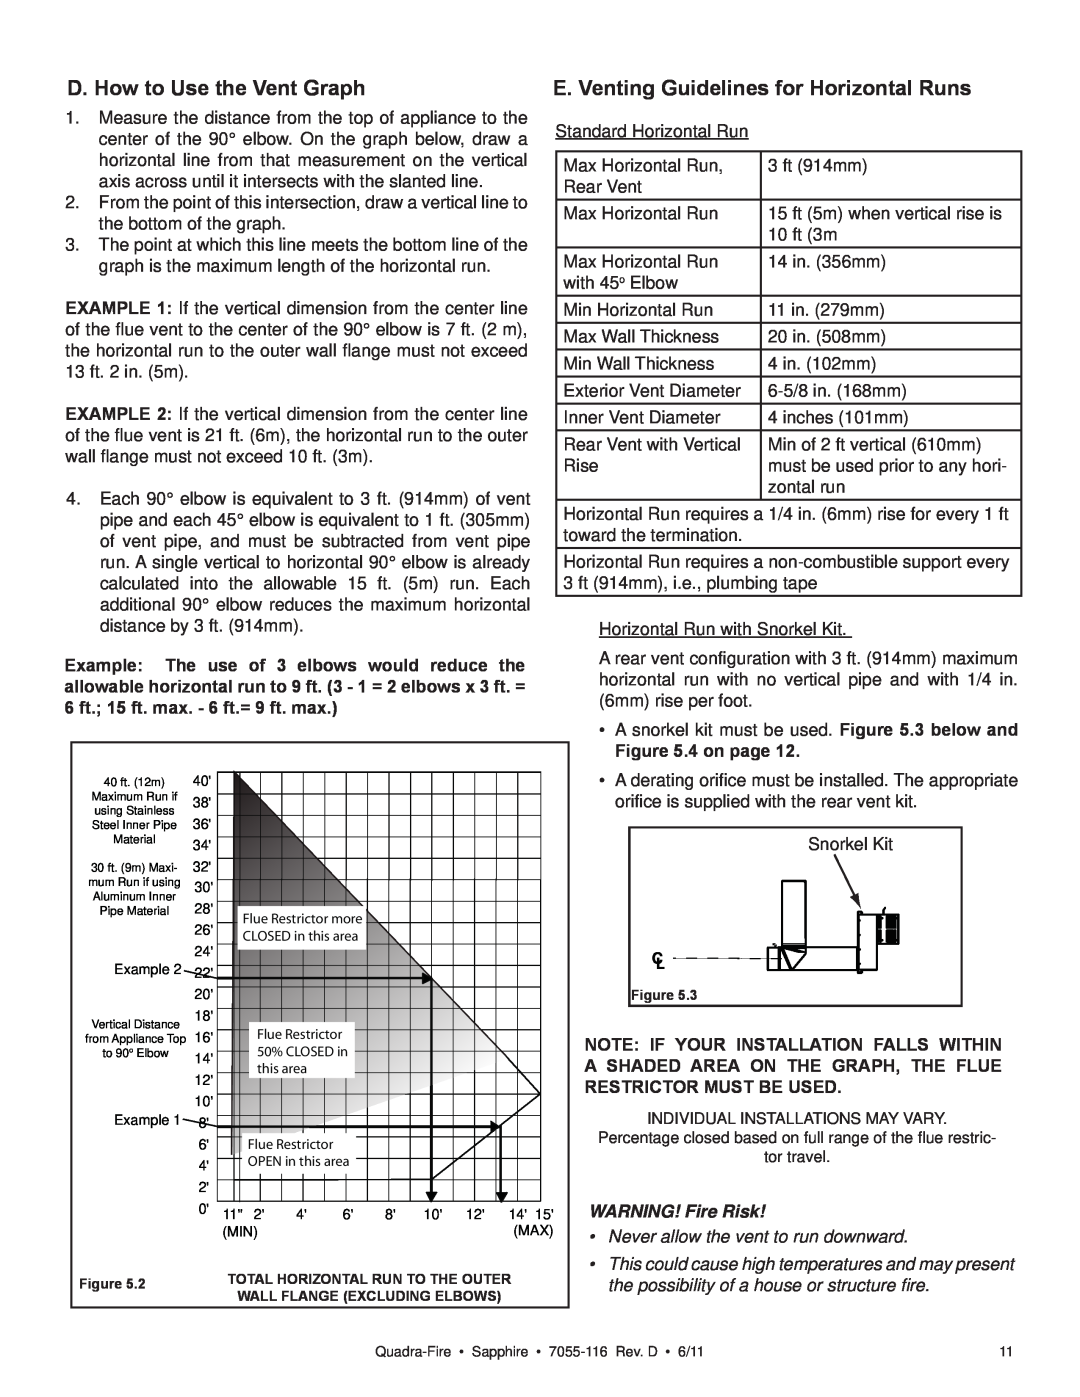 Quadra-Fire SAPPHIRE-D-CSB owner manual D. How to Use the Vent Graph, E. Venting Guidelines for Horizontal Runs, 4 on page 